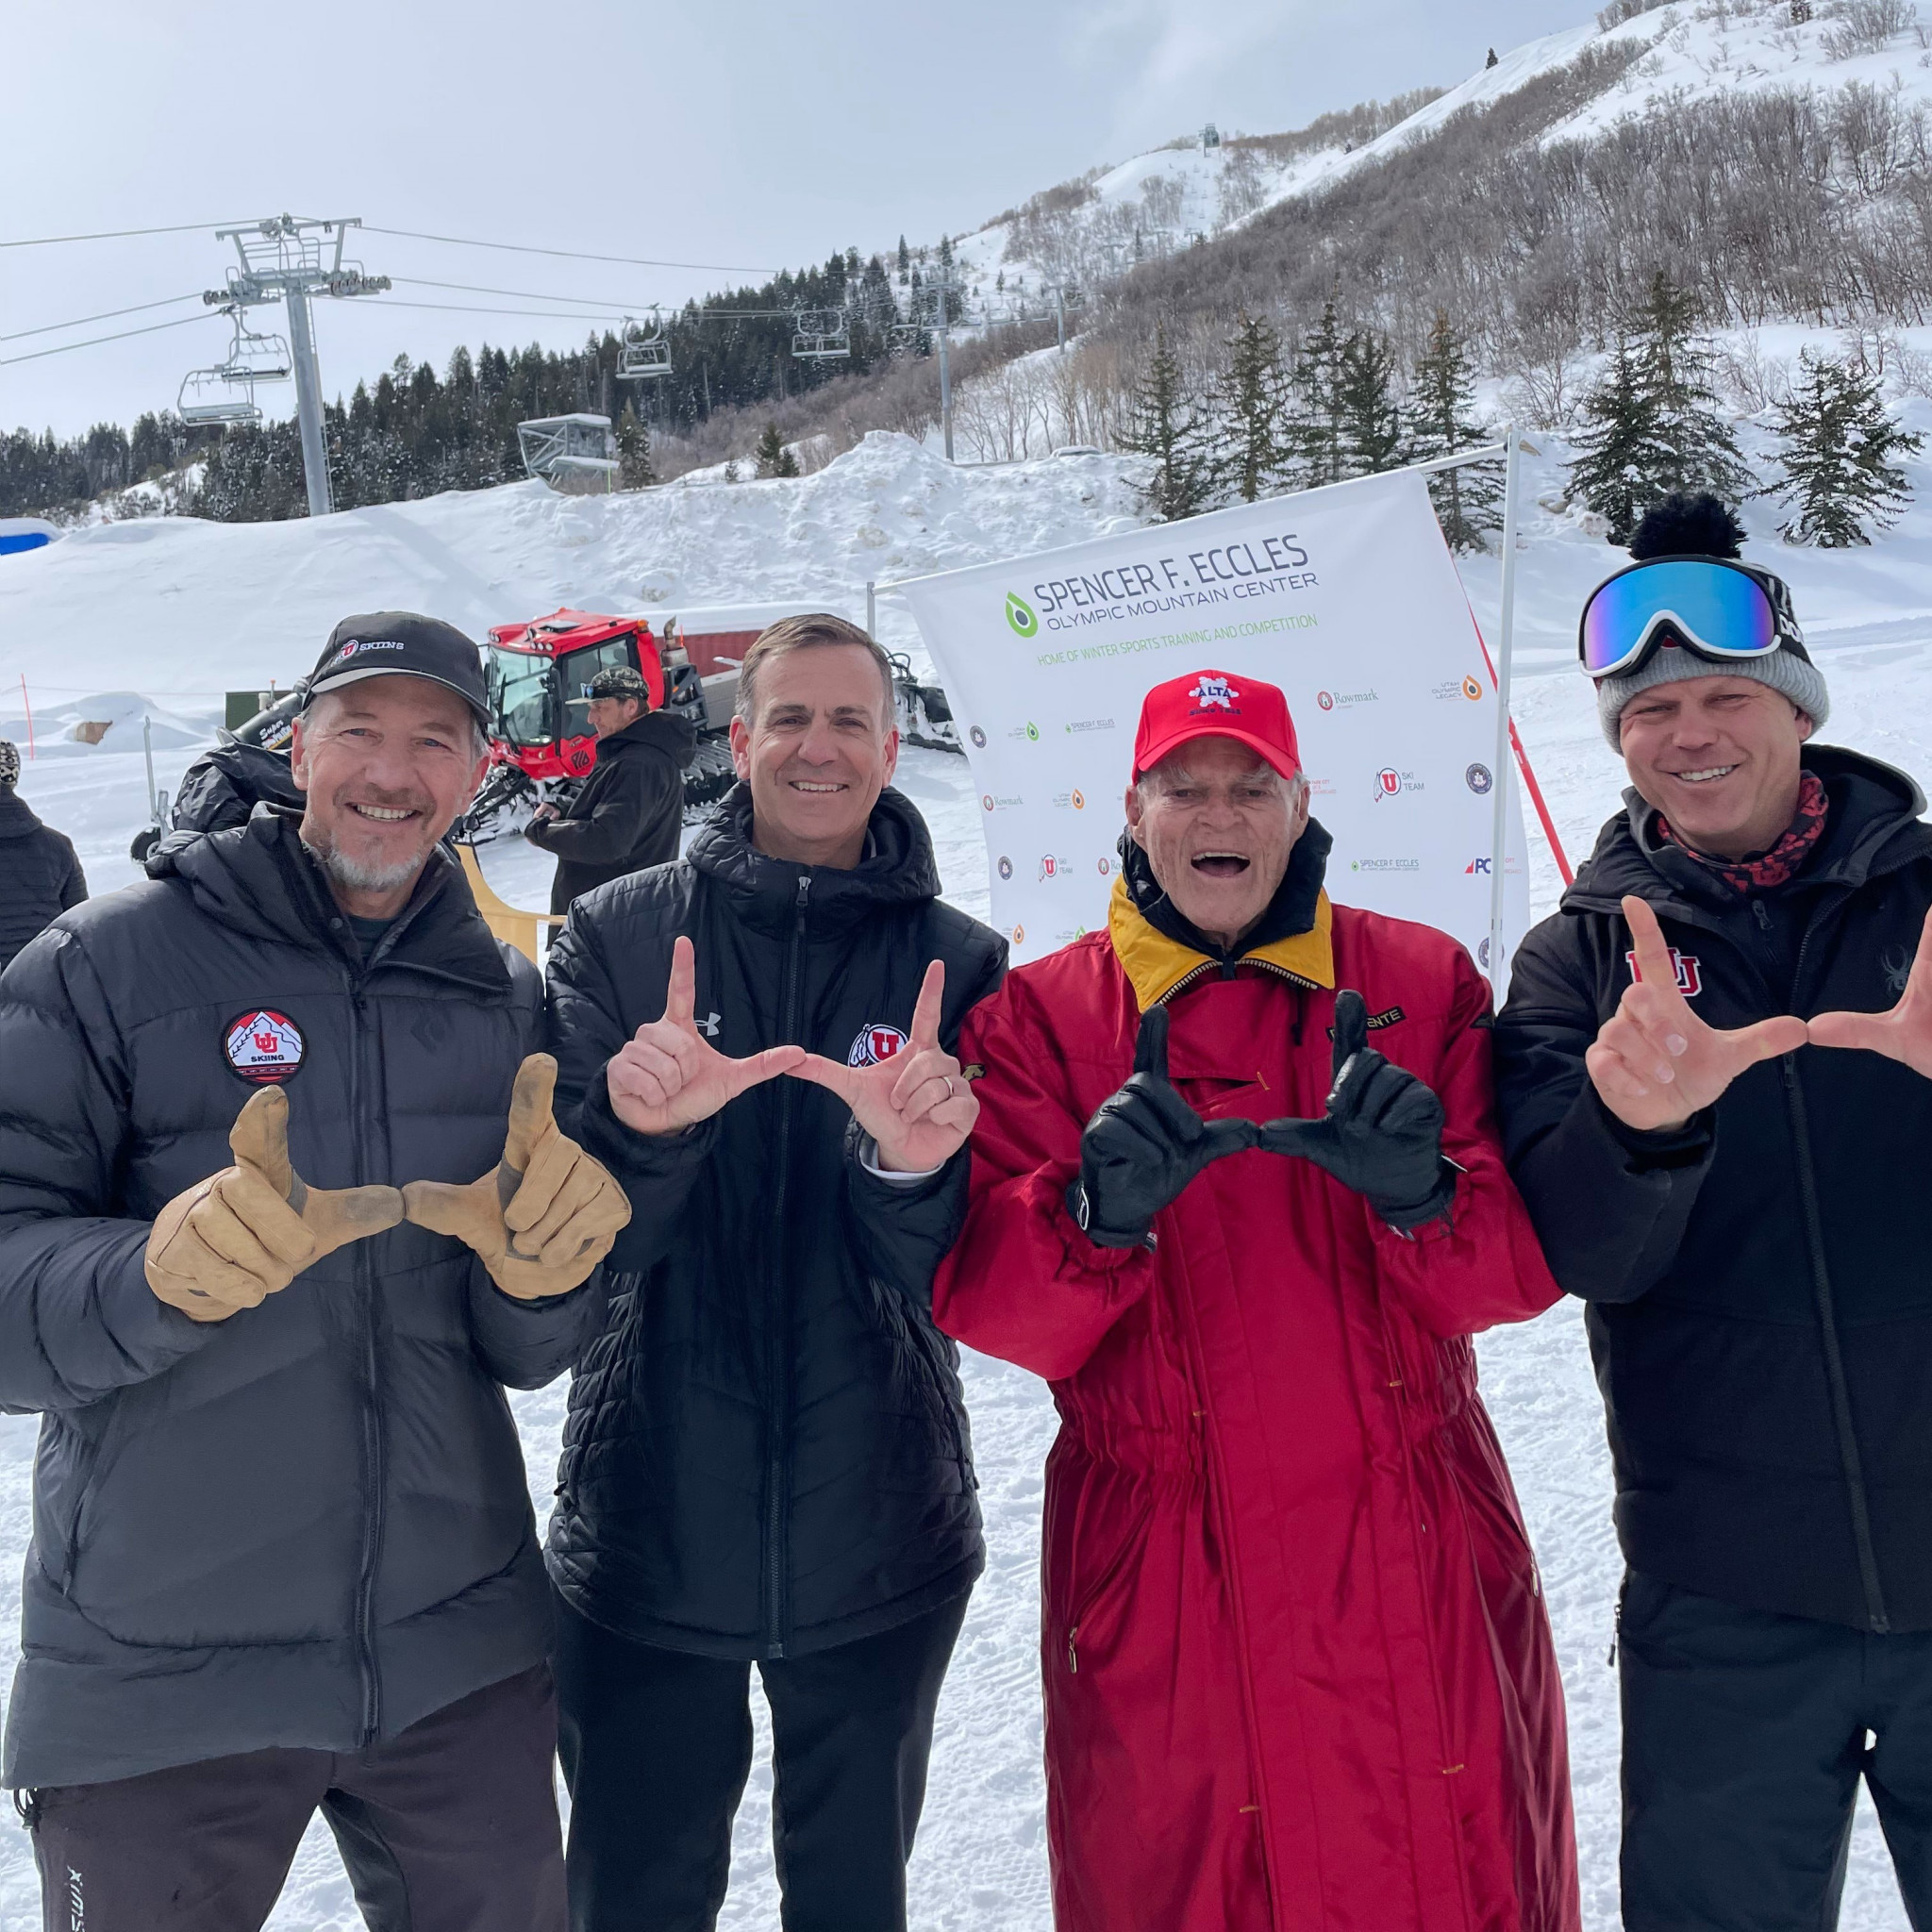 New Olympic Mountain Center opened in Utah as part of West Peak expansion